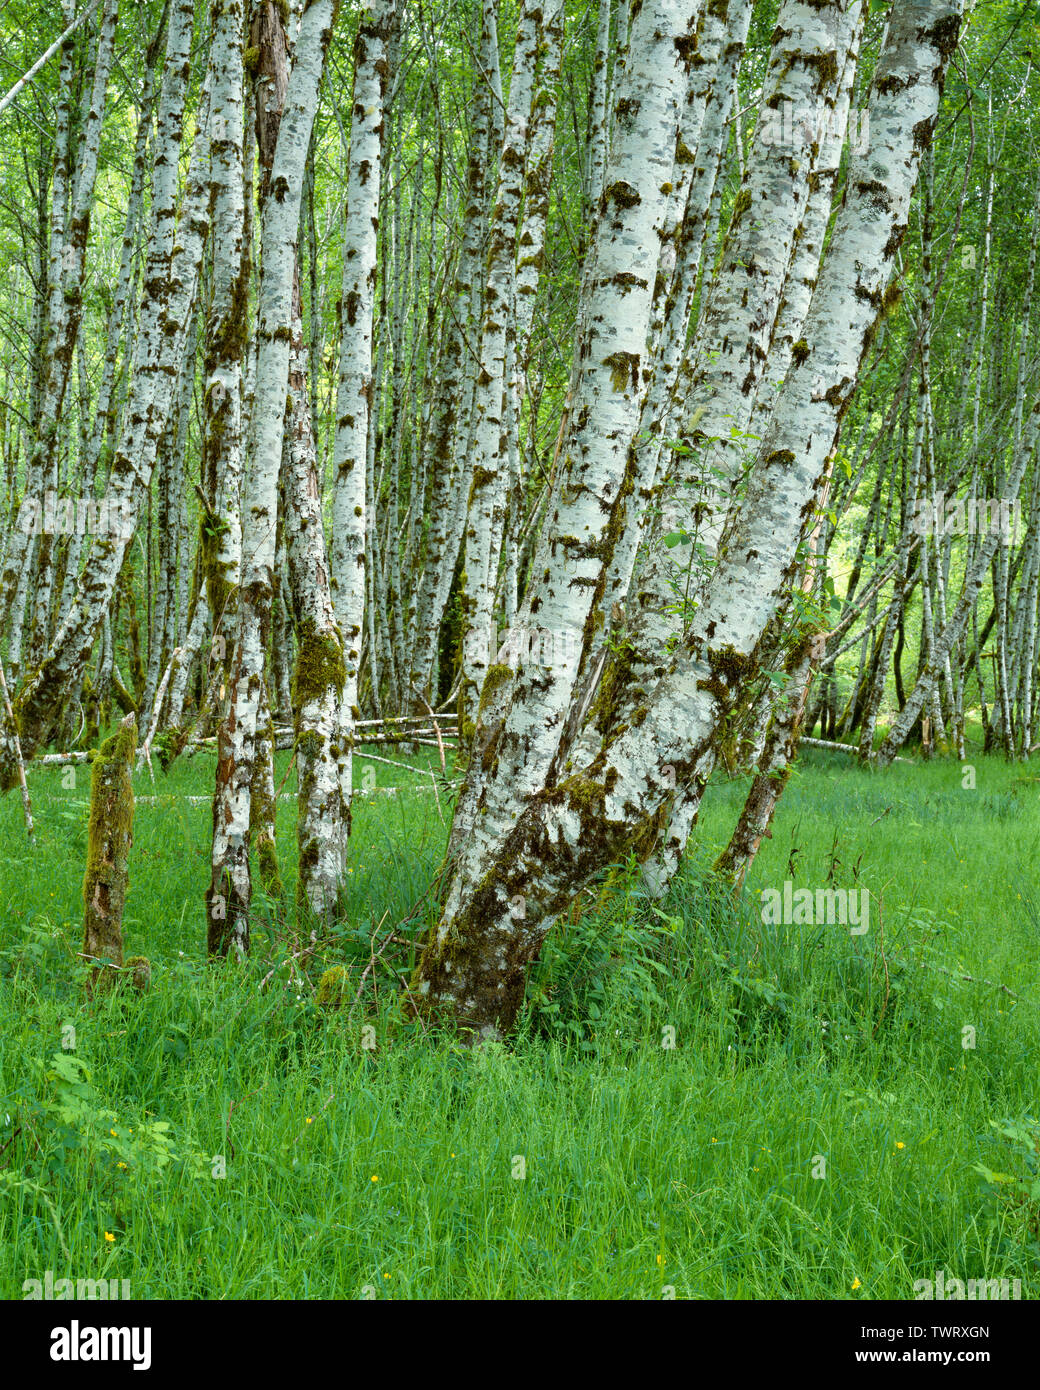 USA, Washington, Olympic National Park, Spring growth of red alder grove and grasses in the Hoh Valley. Stock Photo